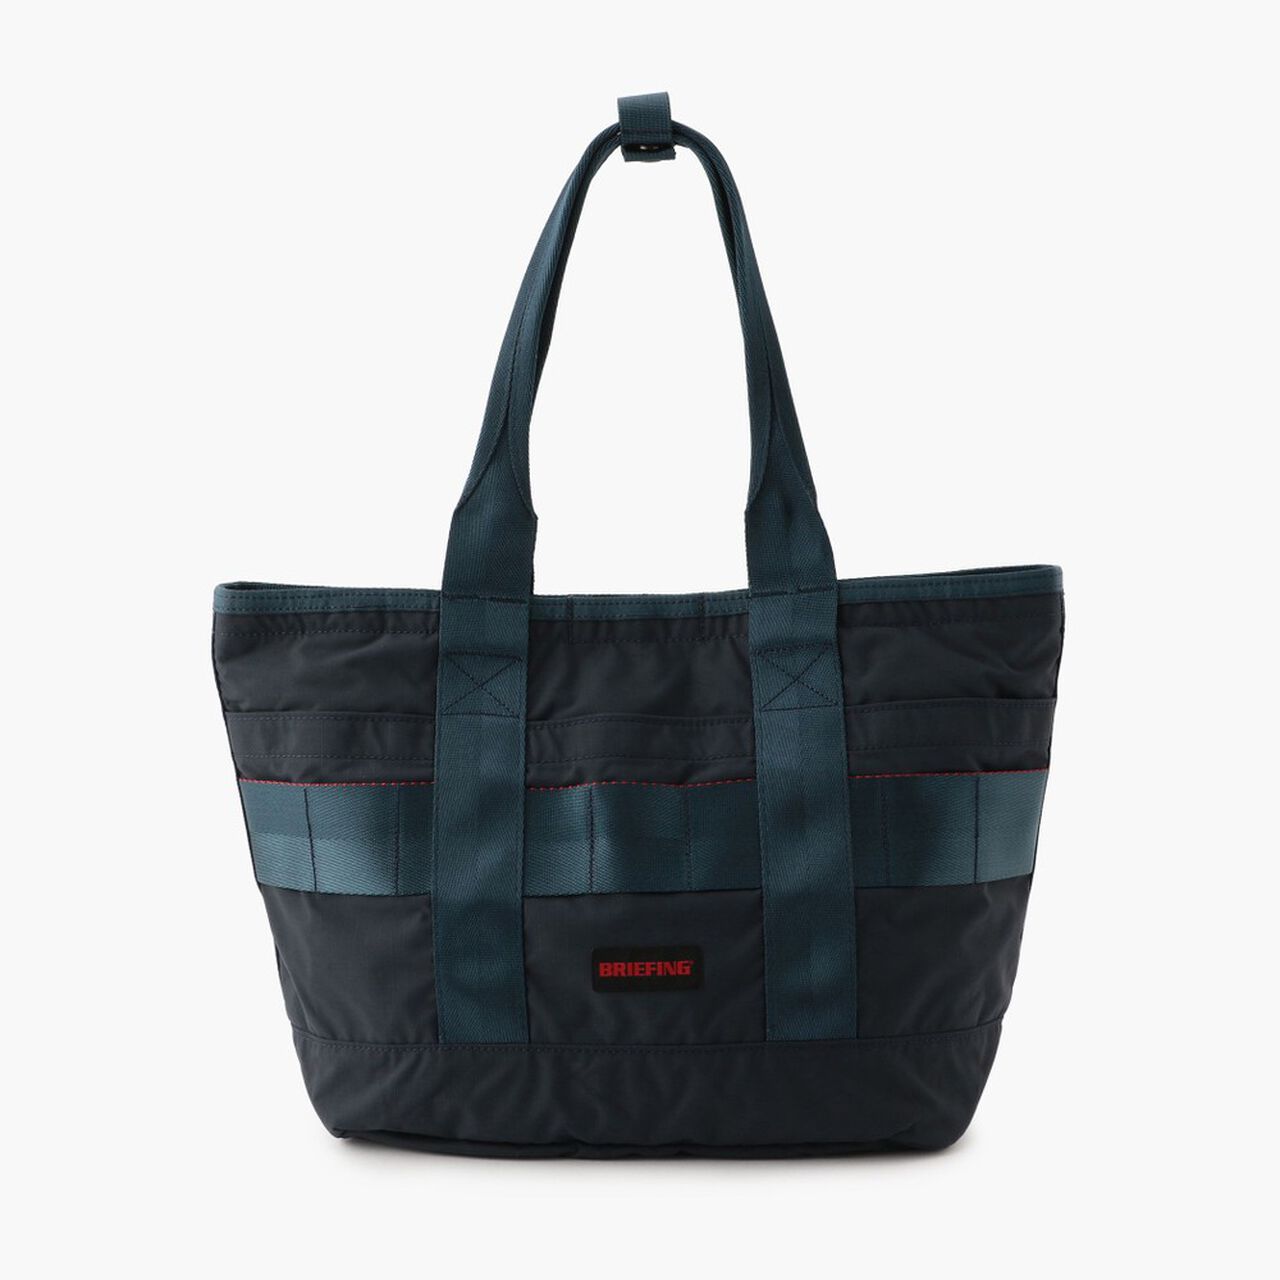 DISCRETE TOTE SM MW,Navy, large image number 1